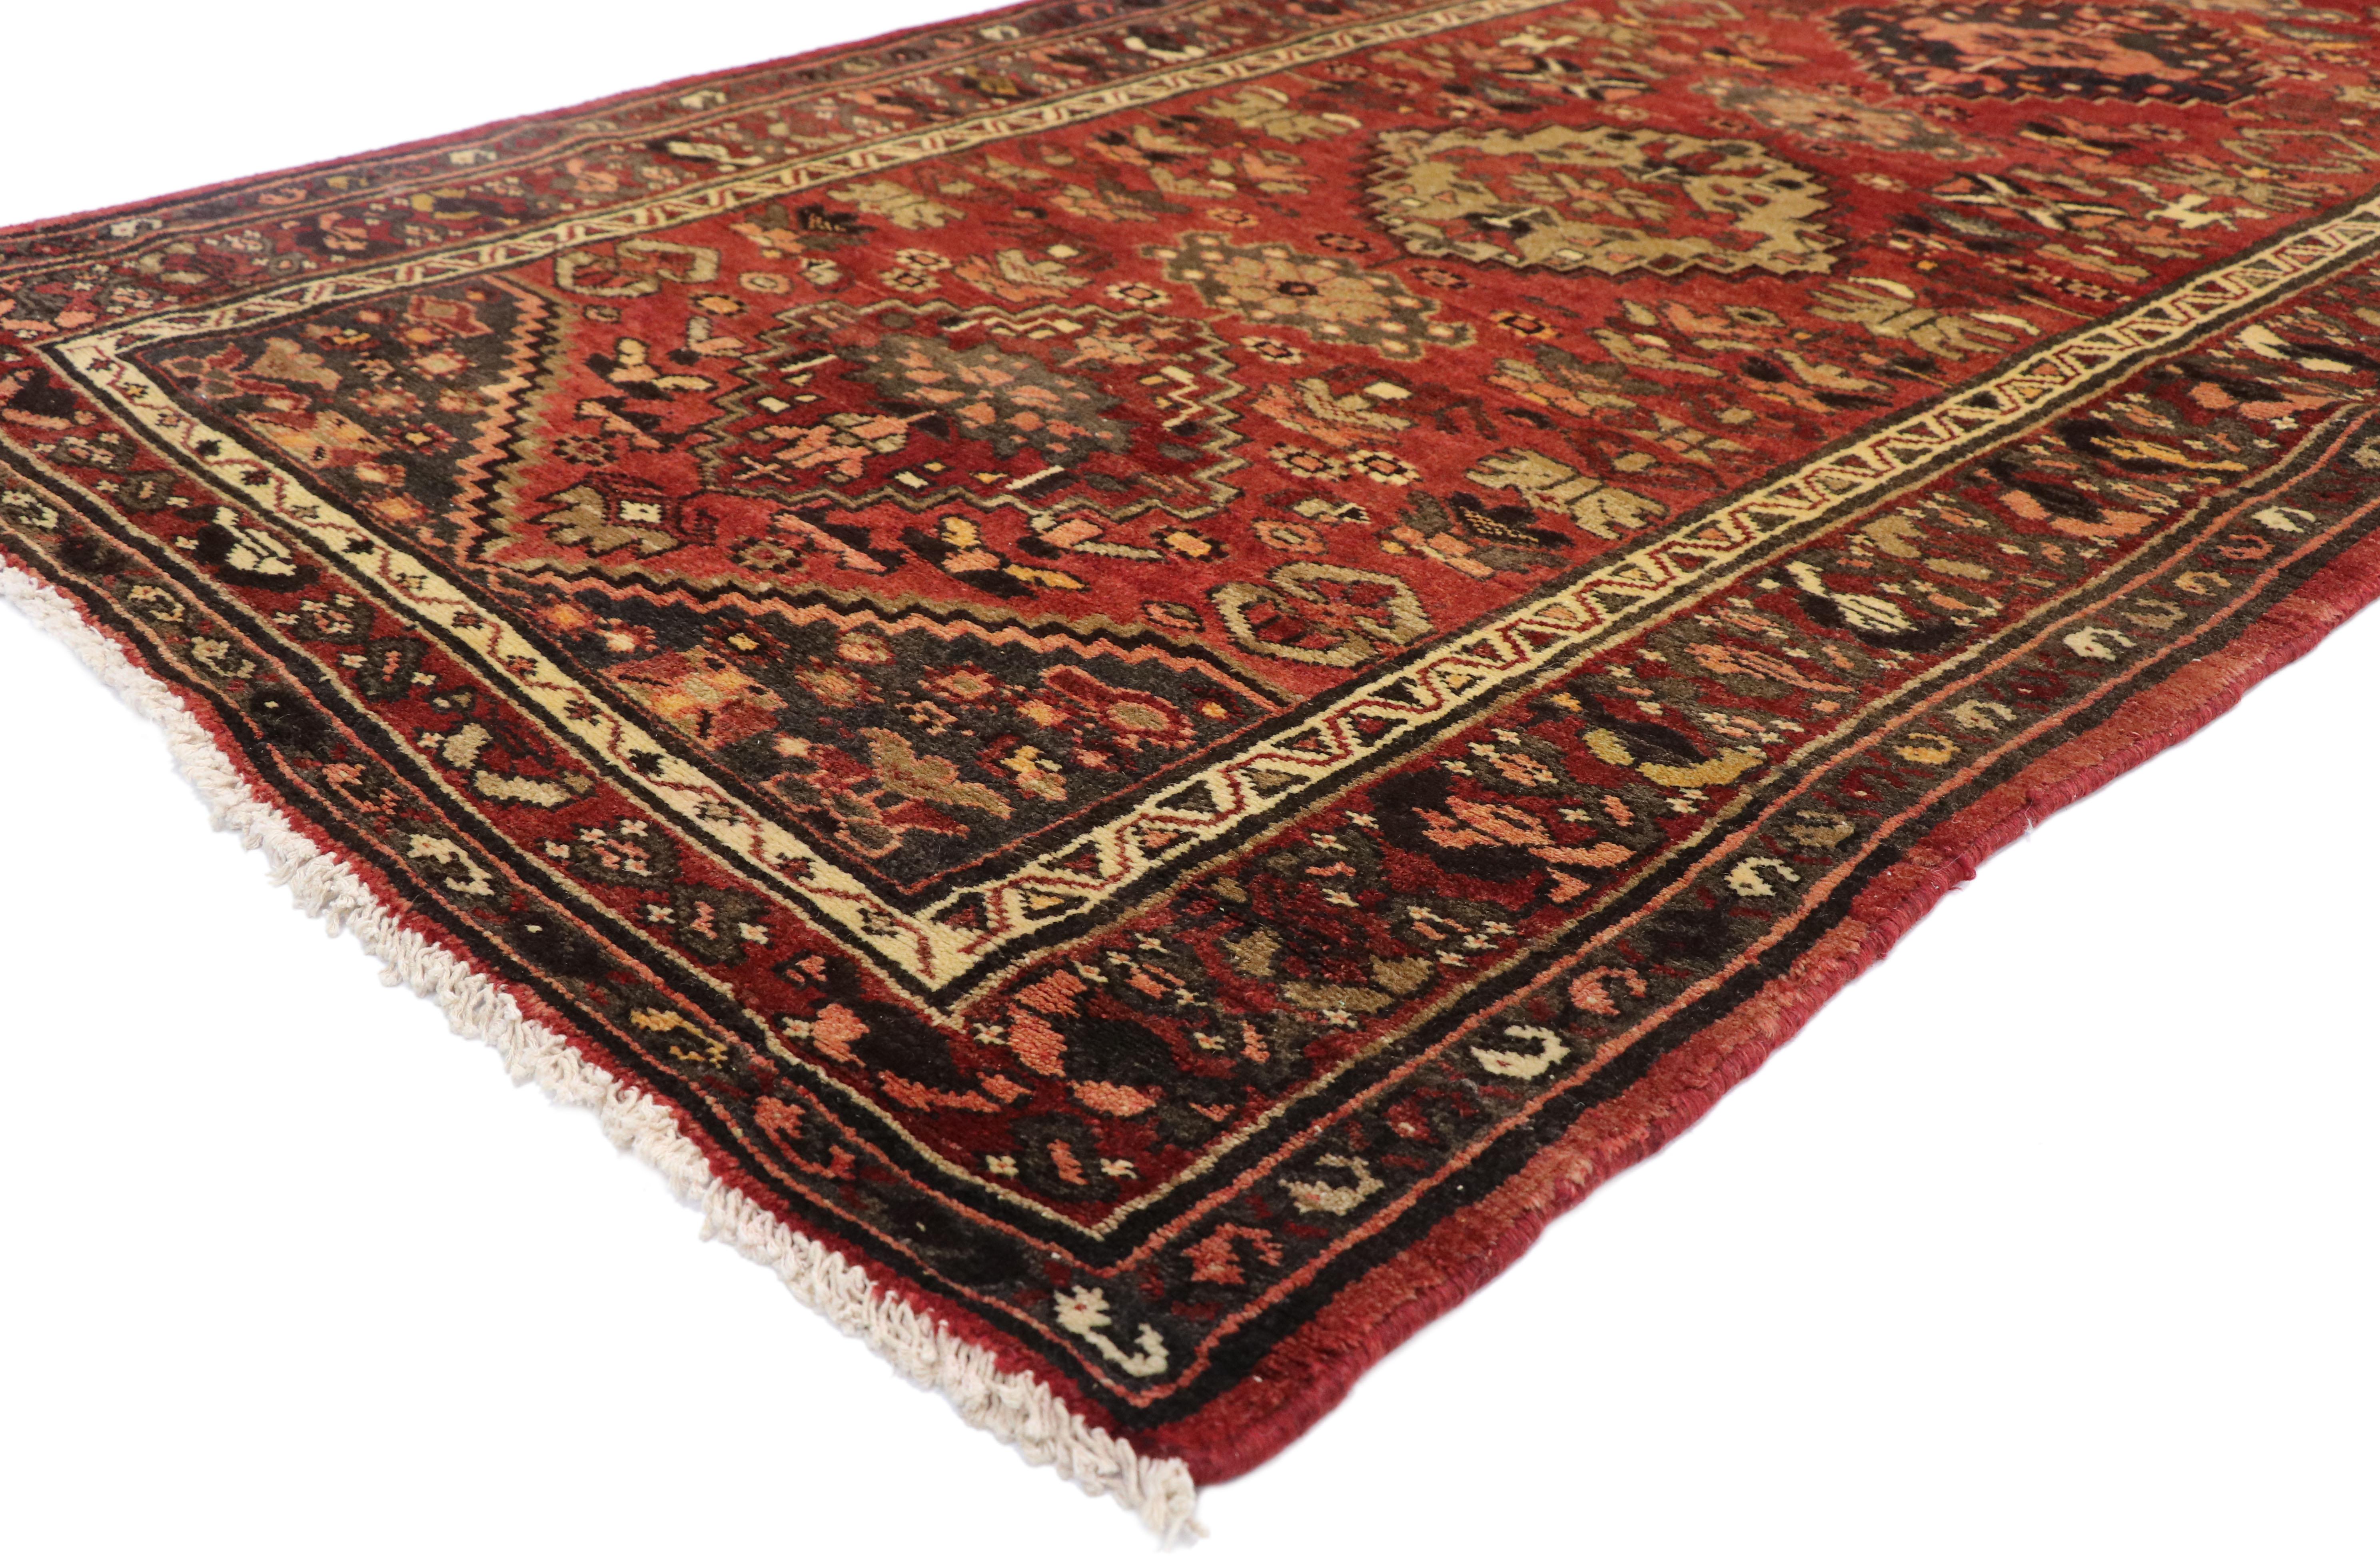 75364 vintage Persian Hamadan runner with Jacobean style, hallway runner. With its warm, rich colors, Jacobean style, and ornate detailing, this hand knotted wool vintage Persian Hamadan runner is well-balanced and poised to impress. It features a